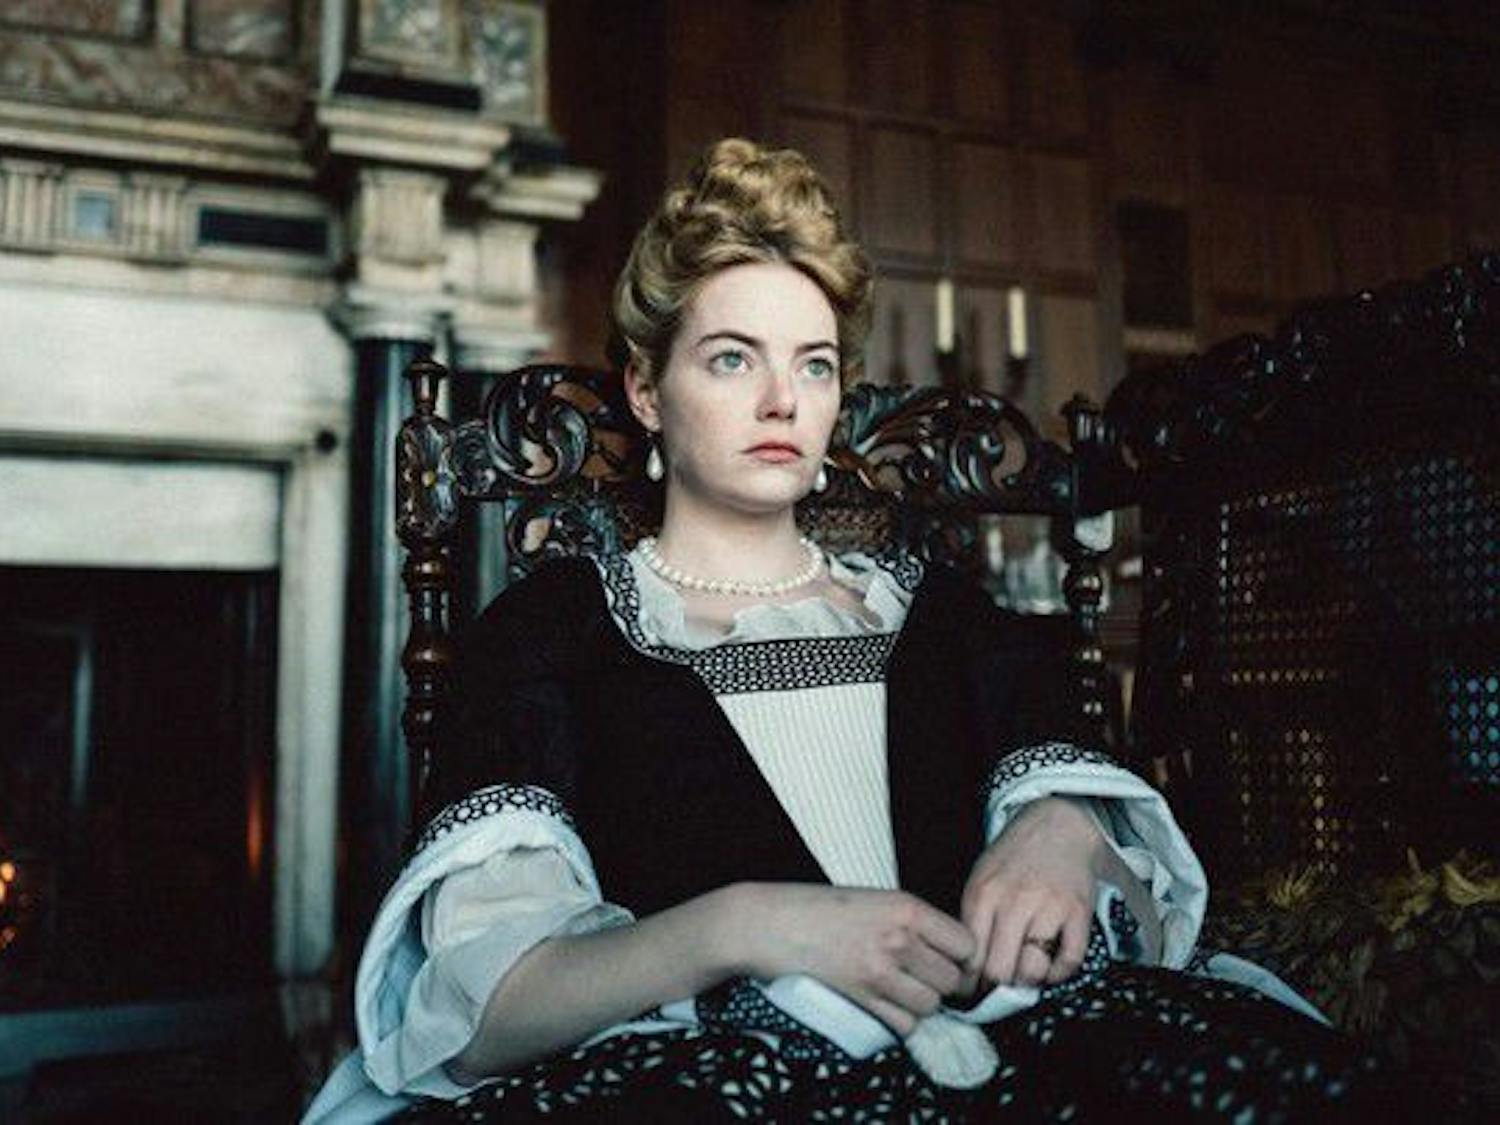 “The Favourite” follows cousin Sarah Churchill (Rachel Weisz) and Abigail Hill (Emma Stone) who are now in competition.